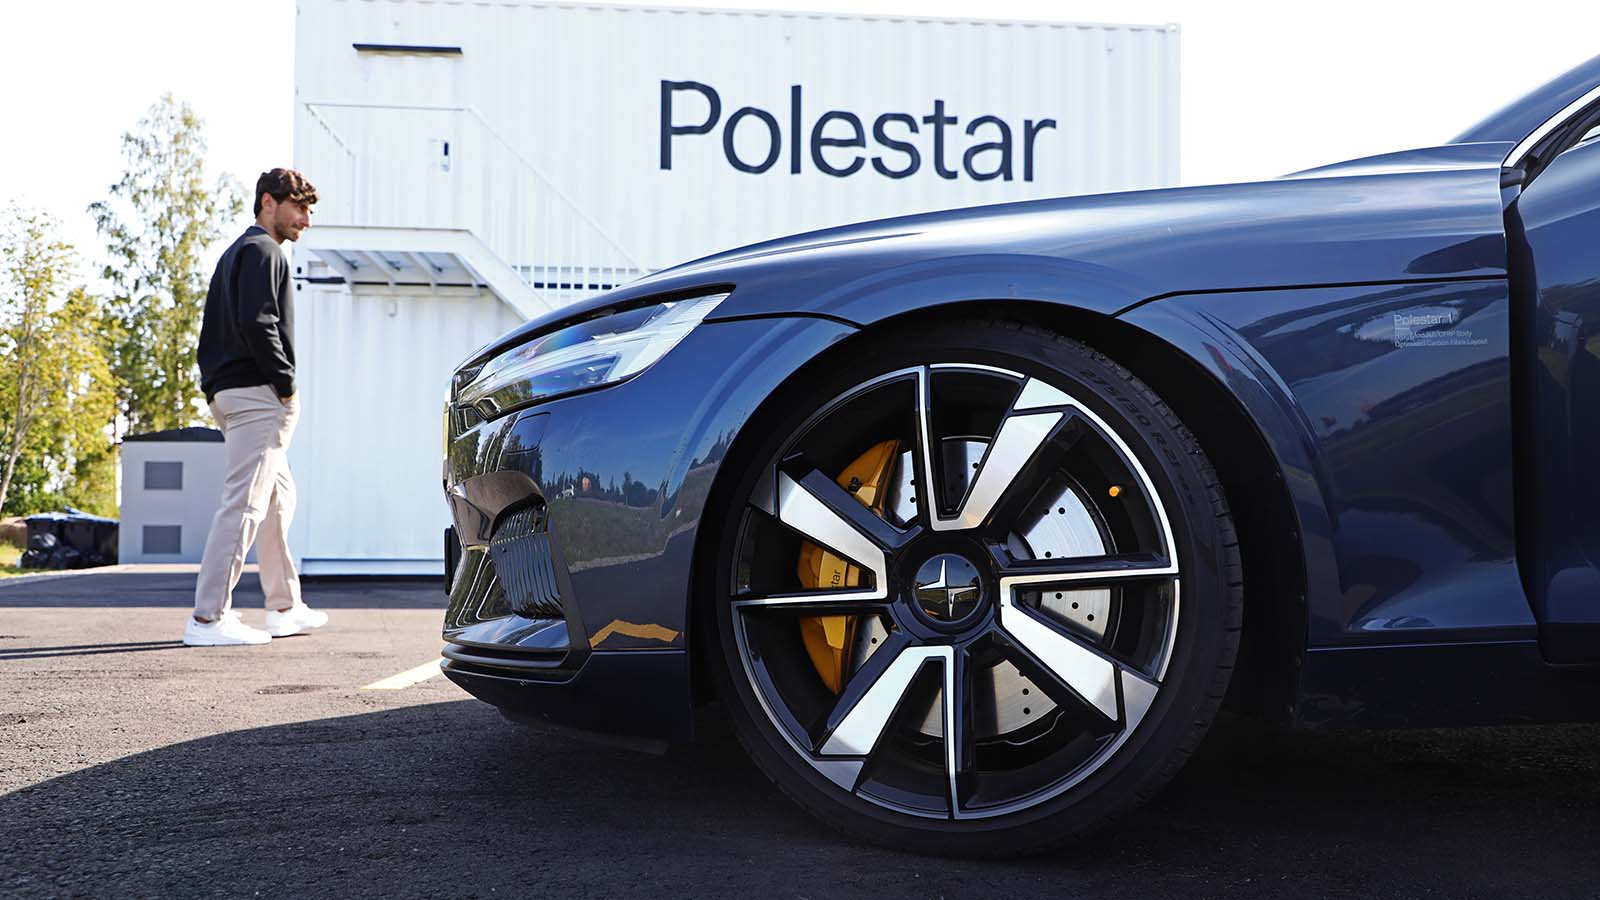 GGPI stock: A close up of a Polestar vehicle in front of a company sign.